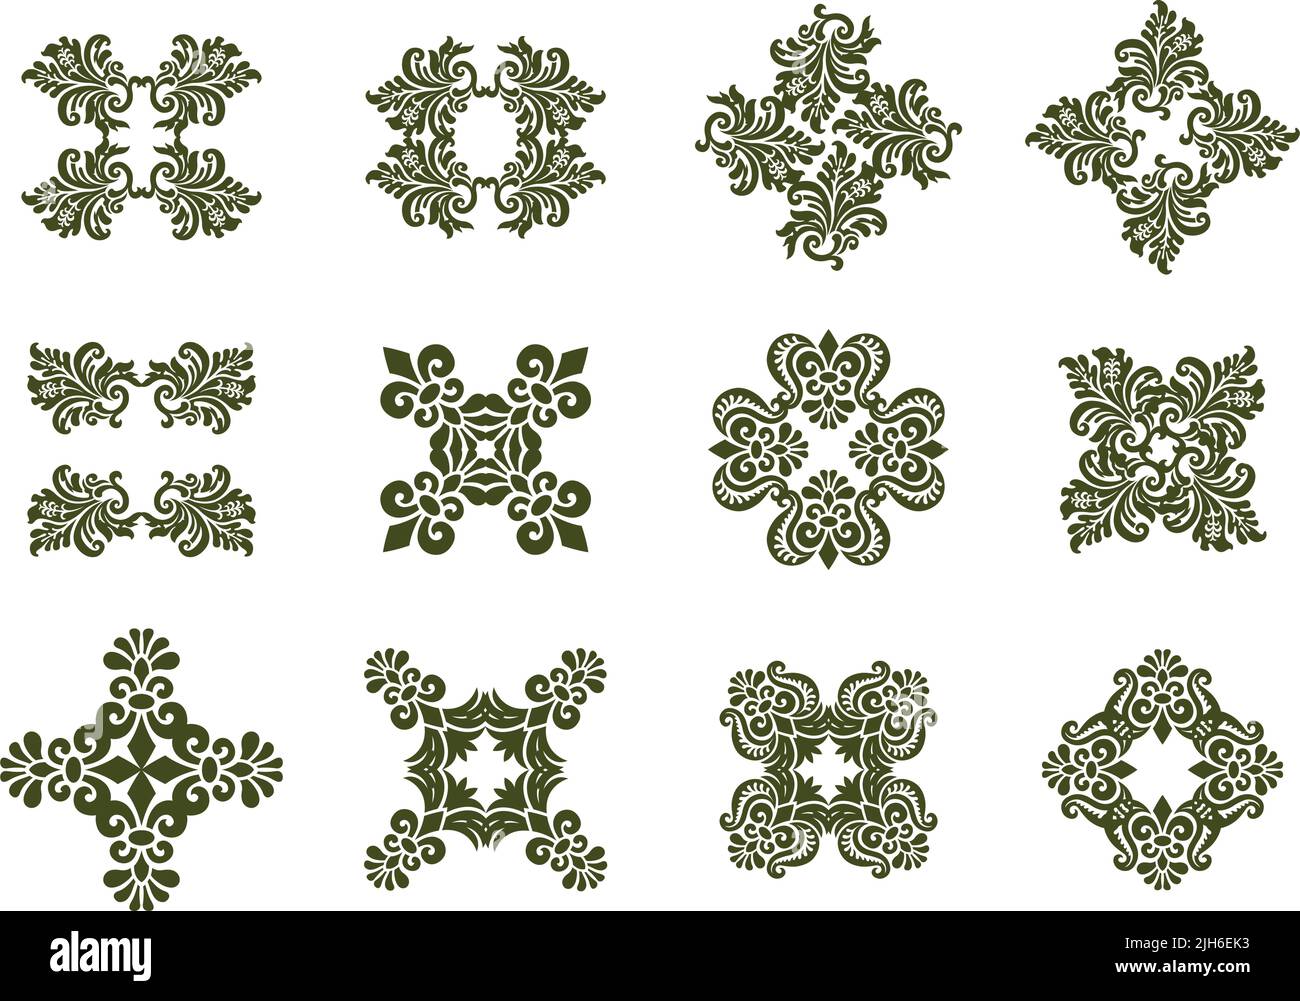 A series of floral decorative vector damask icons. Stock Vector